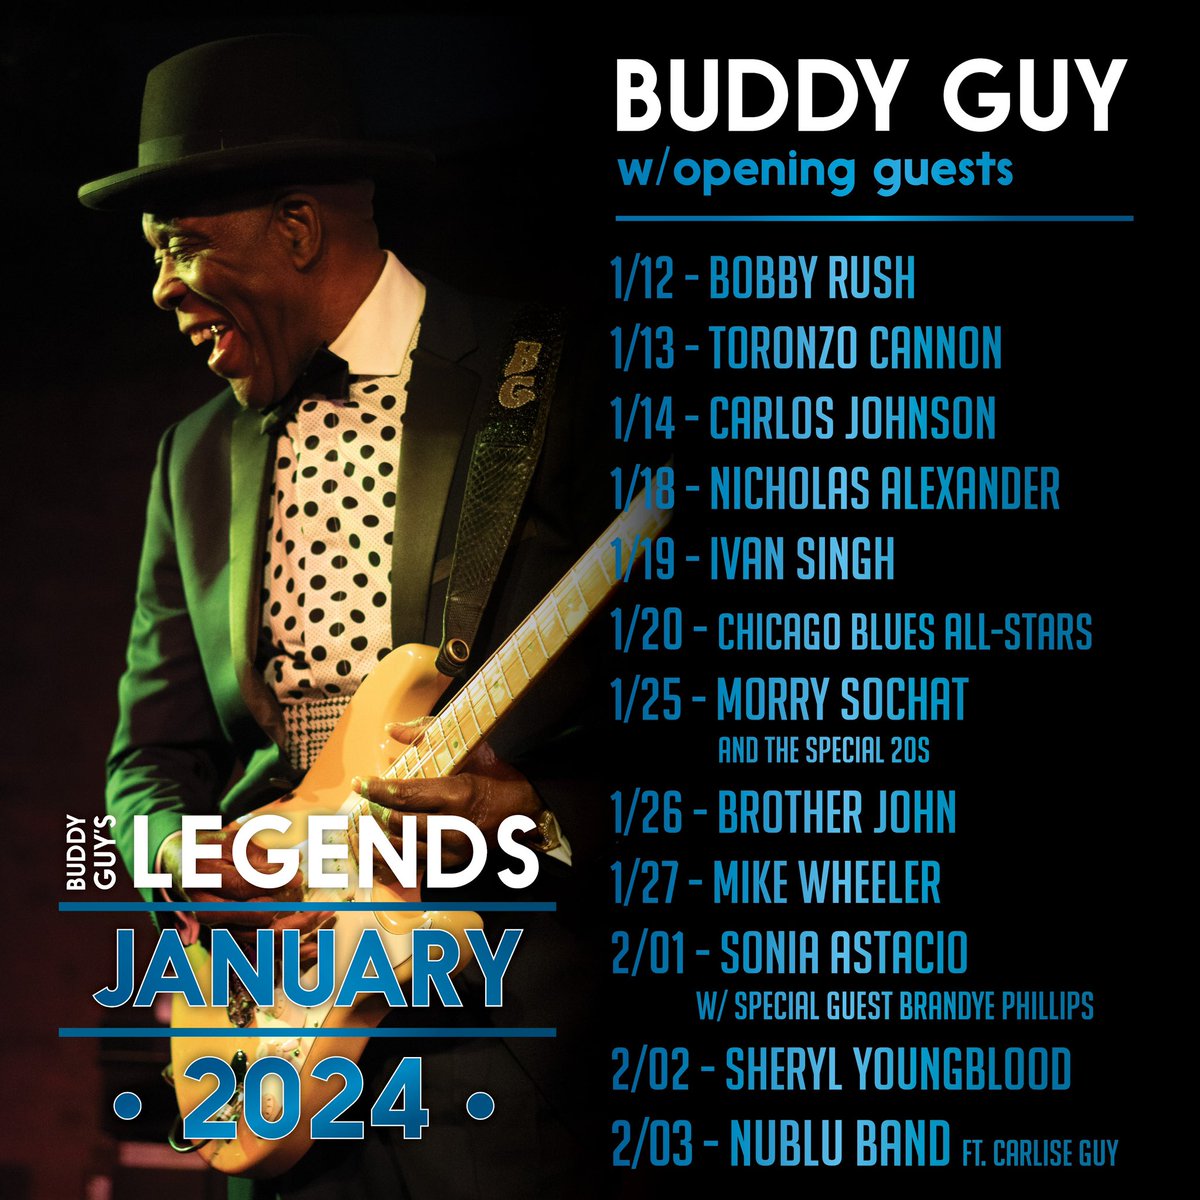 CHICAGO: Tickets for Buddy's annual January residency at @BuddyGuys Legends are on sale TOMORROW Sunday Dec 10 at 10AM CT at buddyguy.com! Check out the opening band lineup here and get all the info on tickets, seating, and more: buddyguy.com/january-2024-i… - Team BG